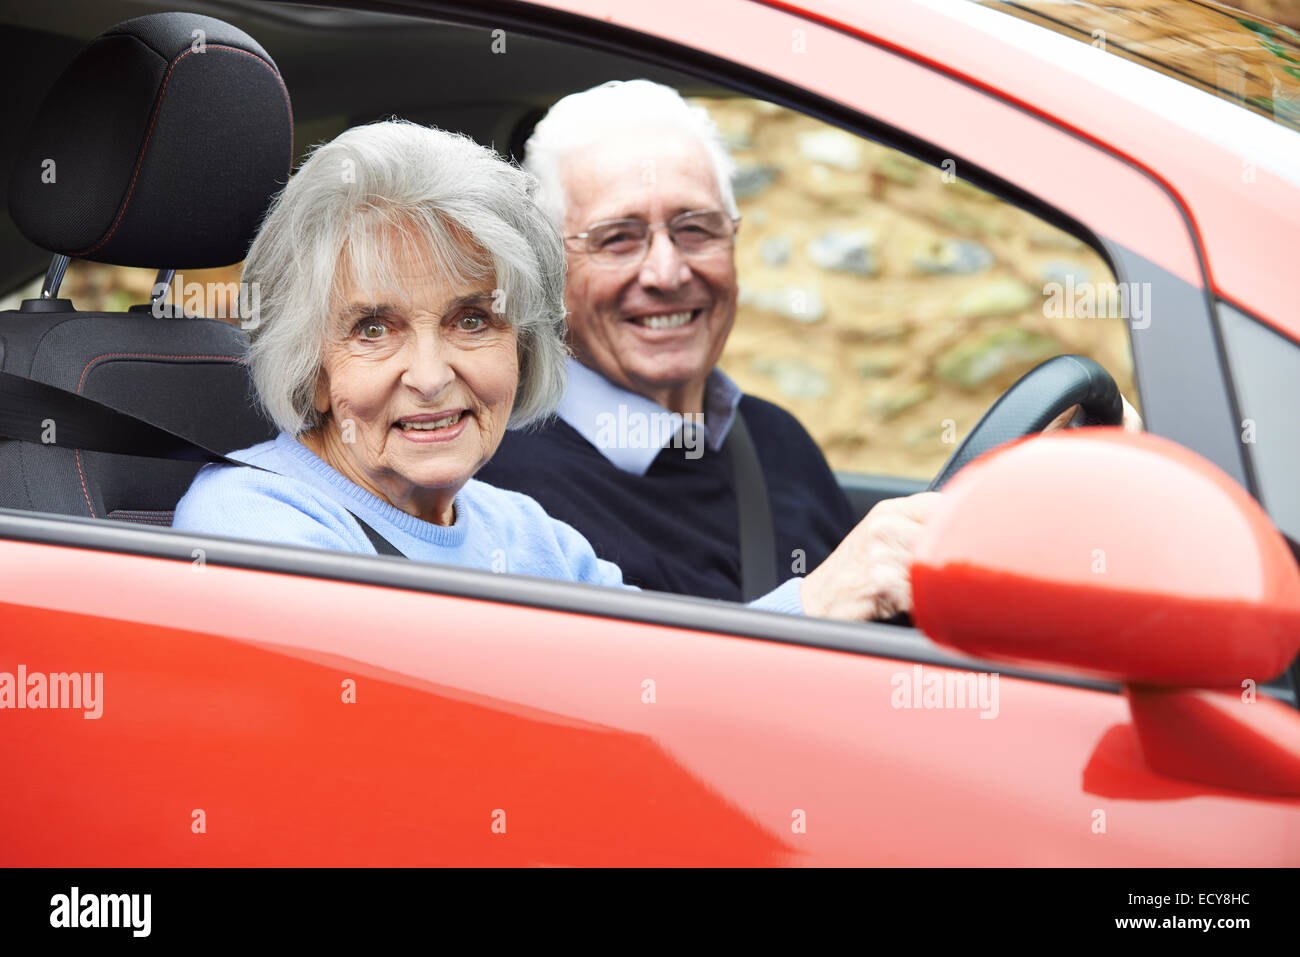 Portrait Of Smiling Senior Couple Out For Drive In Car Stock Photo